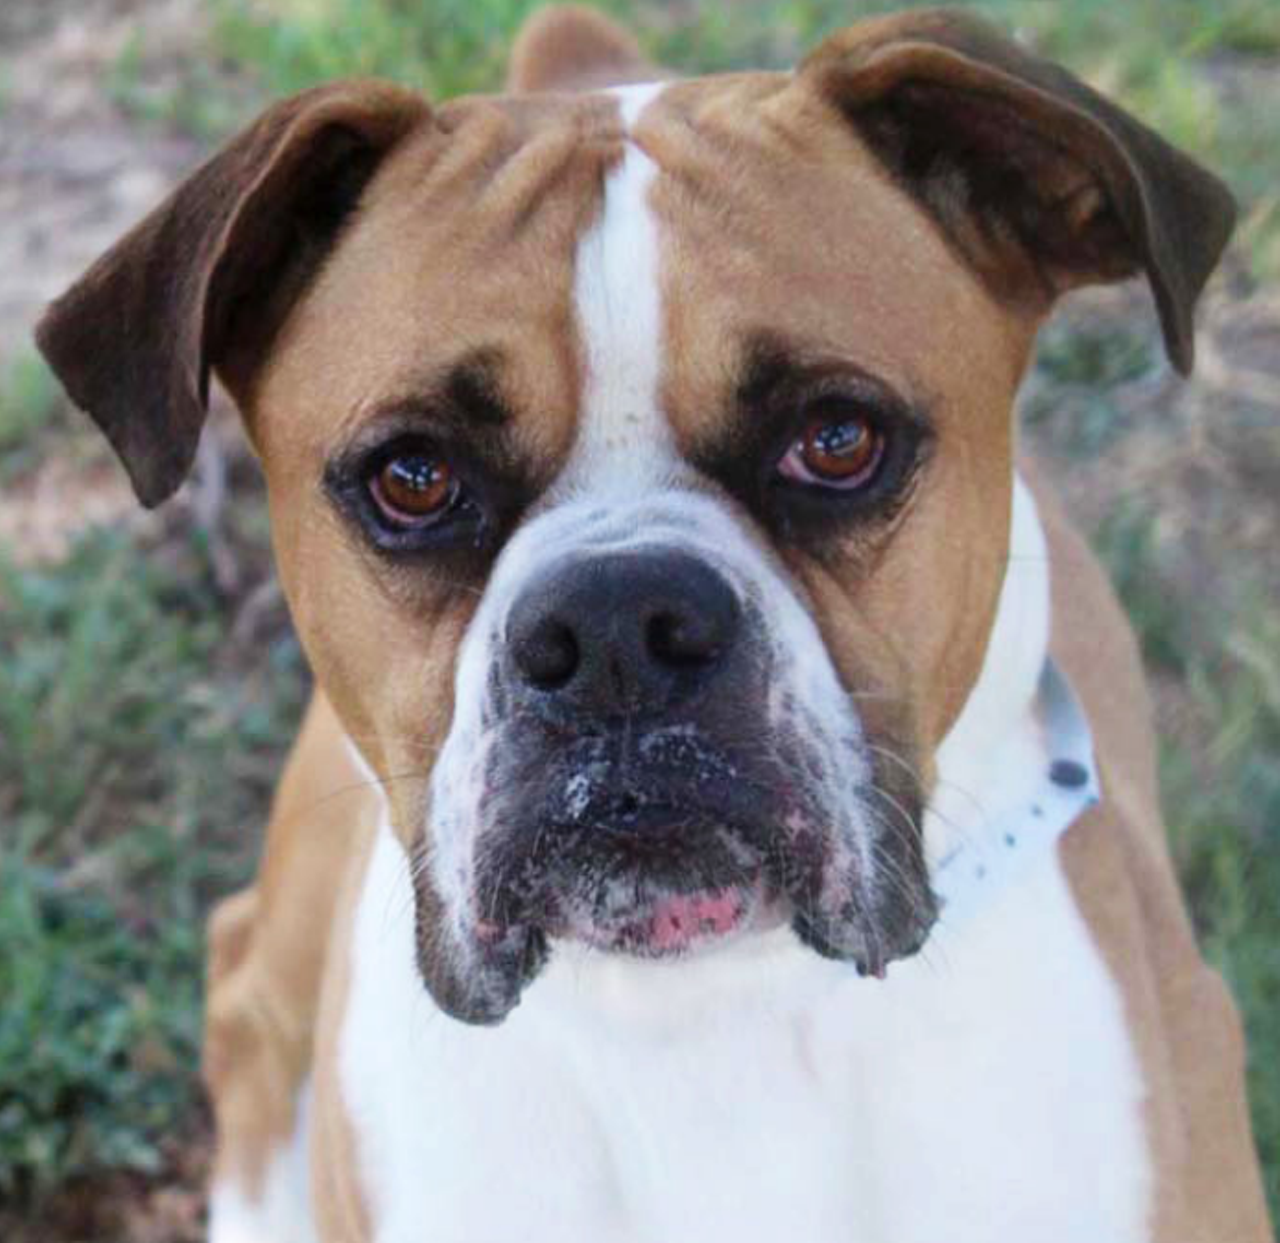 Cyrus
"I may be a boxer, but boxing isn’t my thing. I’d much rather play with a squeaky toy or give you slobbery kisses. I’m the gentle kind of guy that likes to stop and smell the roses – or at least pee on them. I’m not half bad at walking on a leash, and I would love to show you. Then I will look at you with my big brown eyes and beg you to take me home, and we will be happy for ever after."